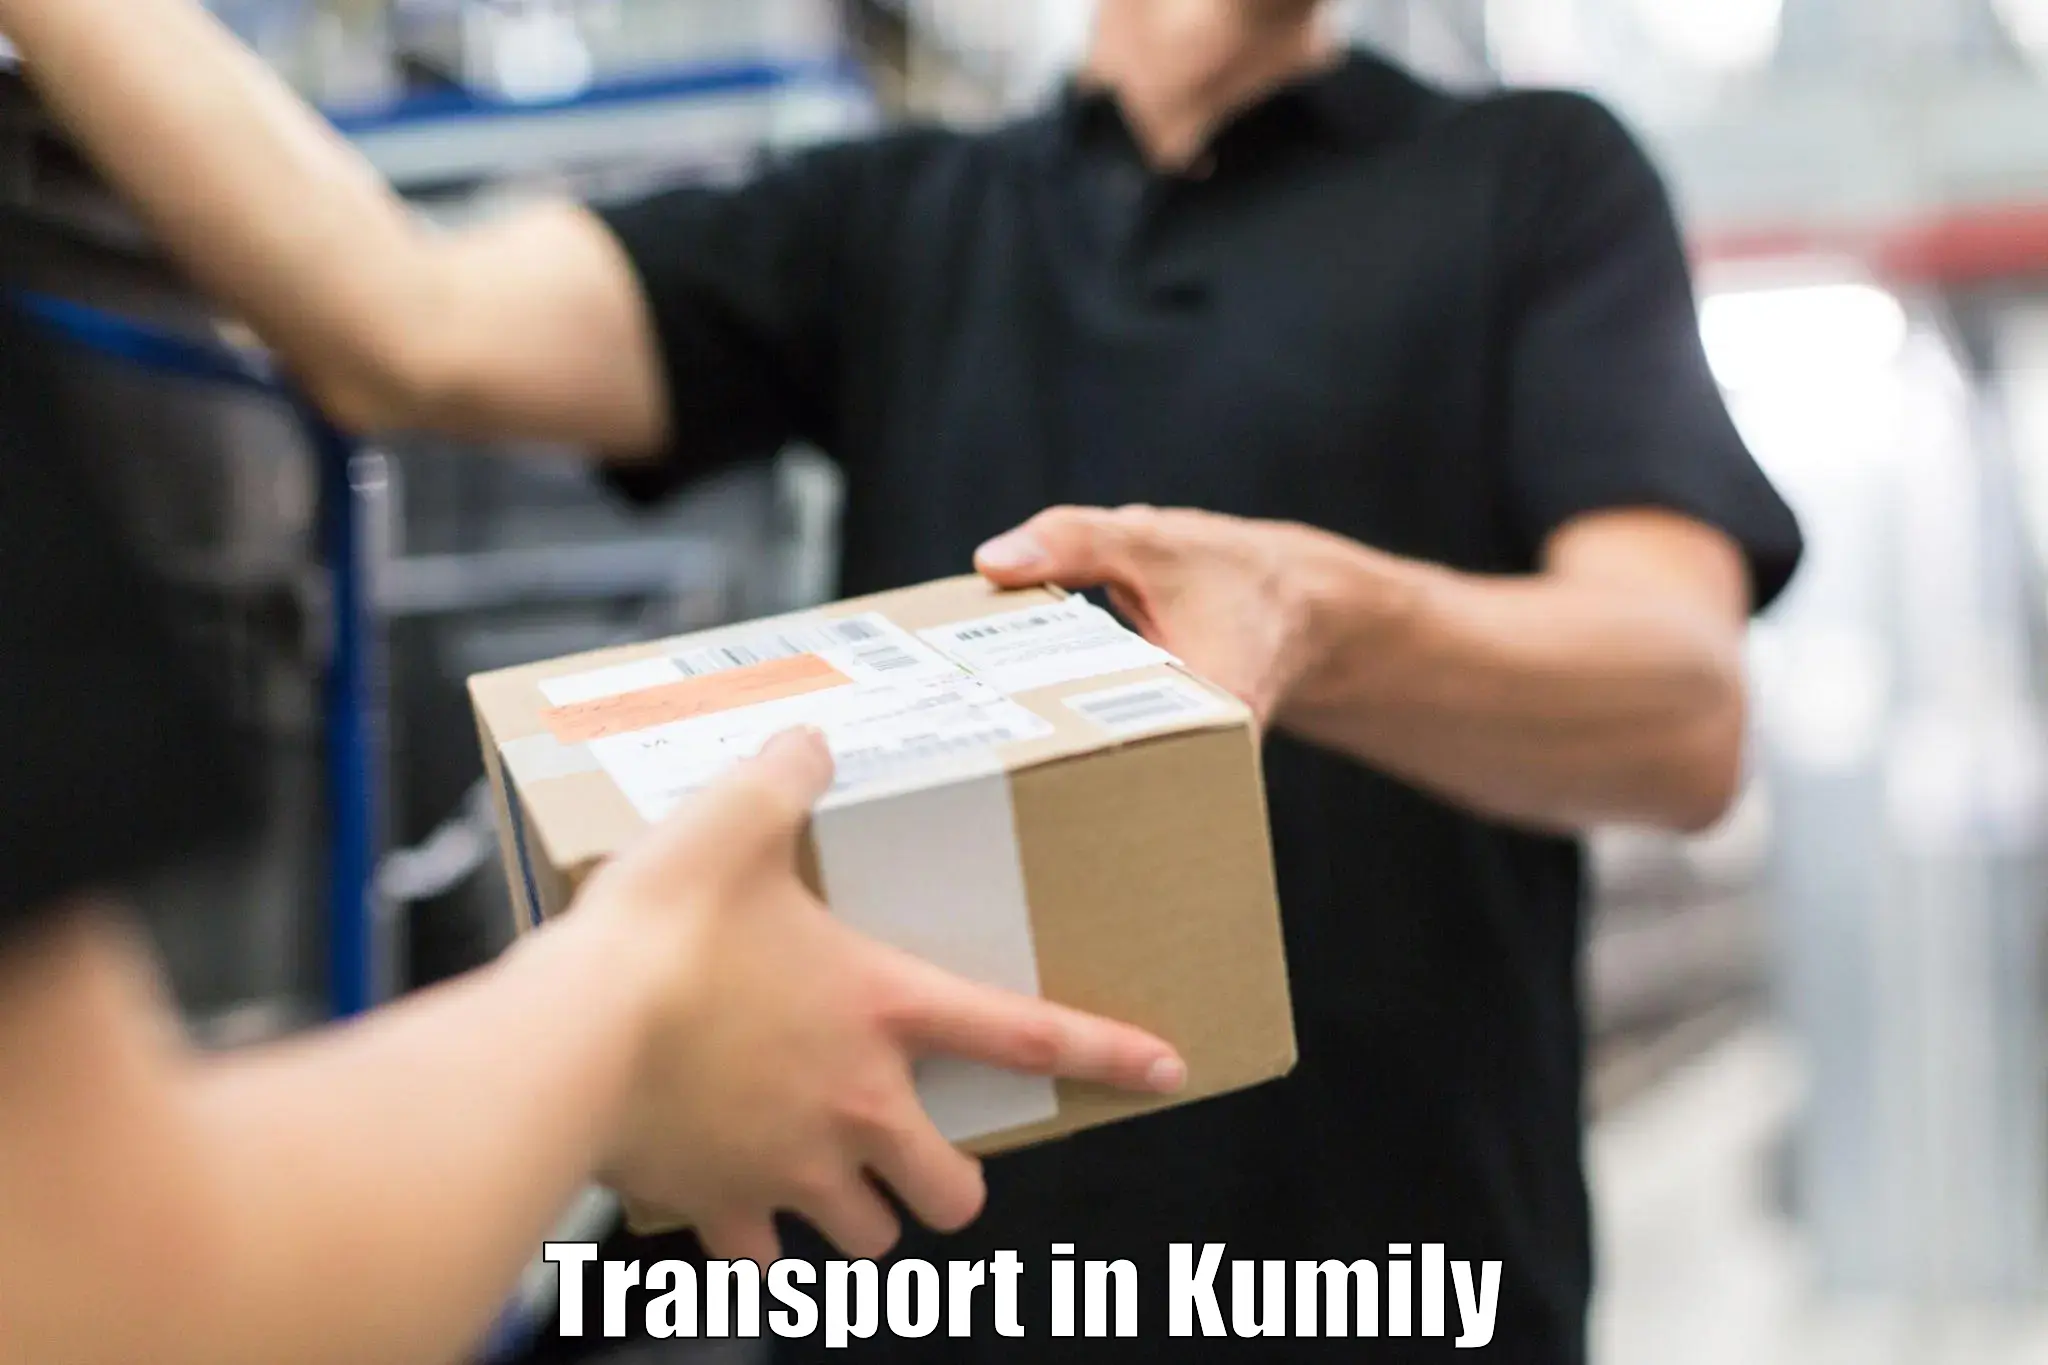 Road transport online services in Kumily